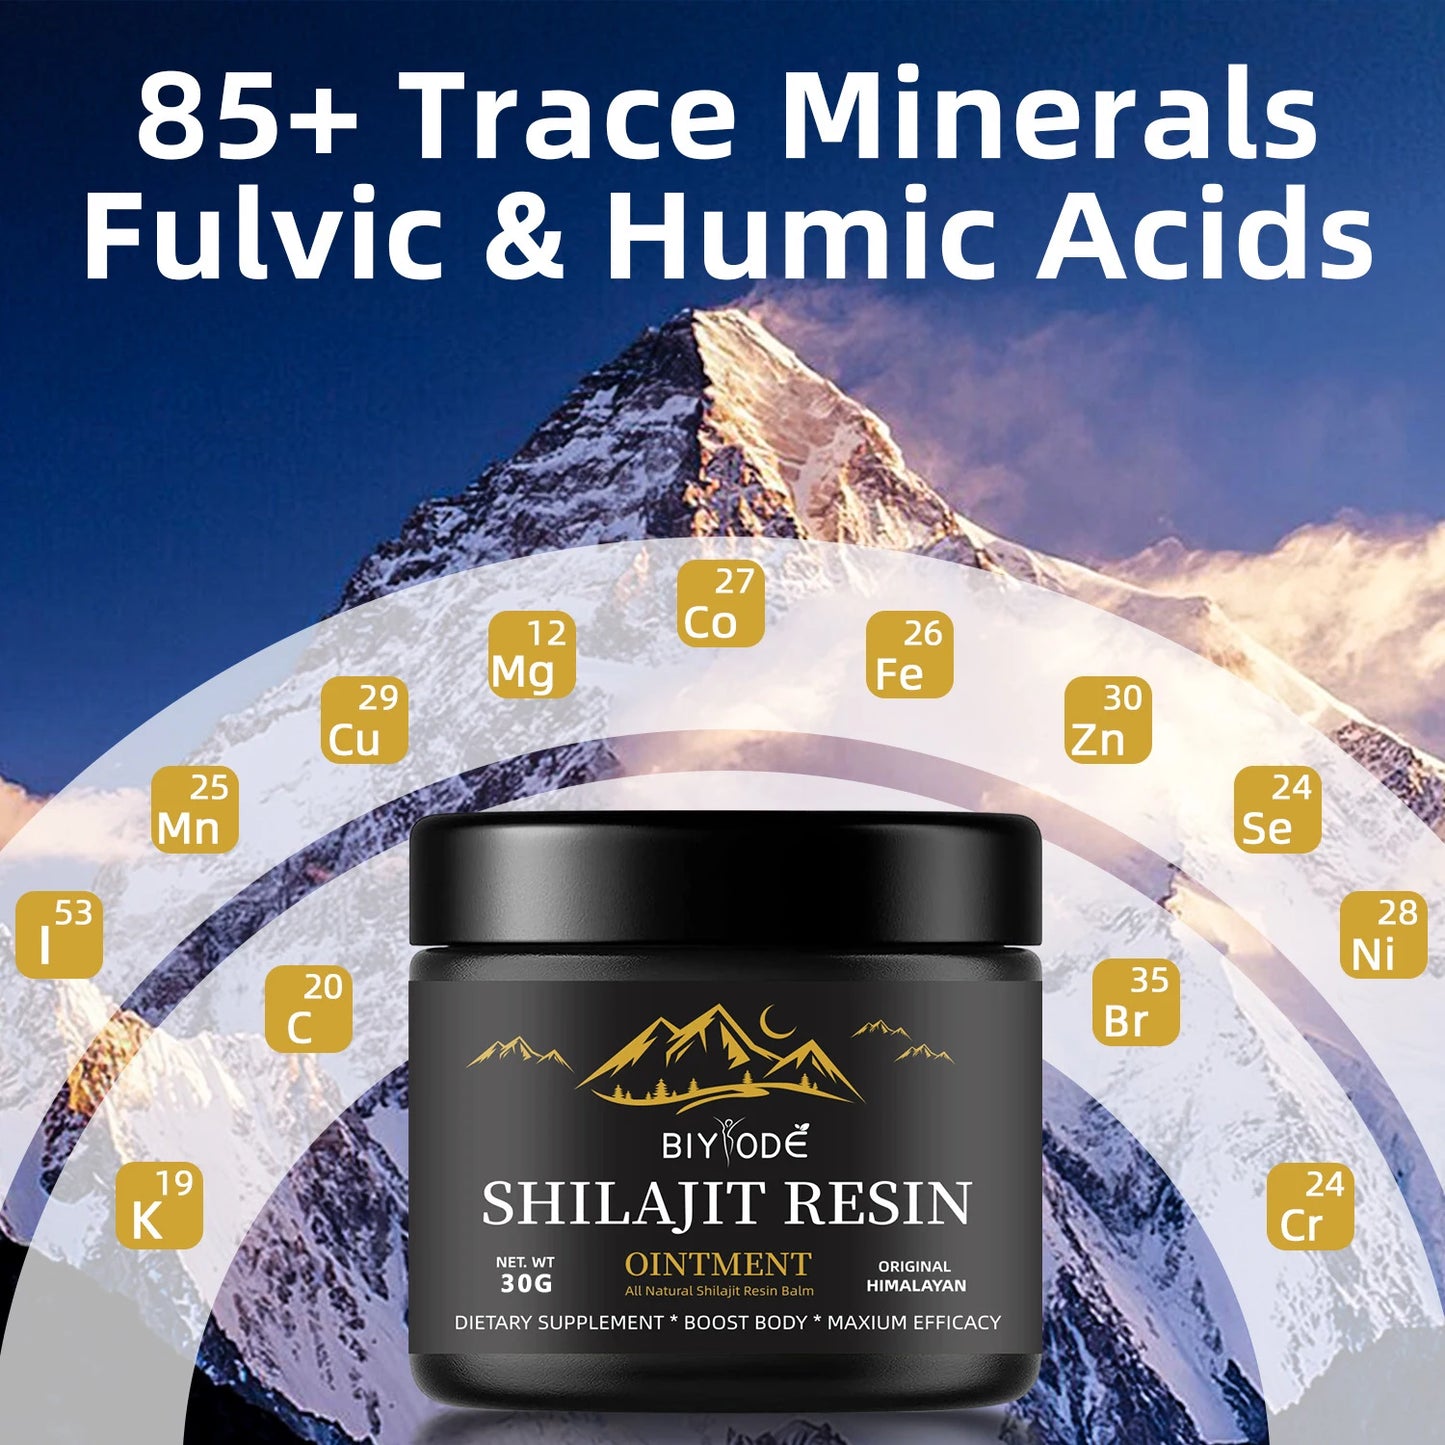 00% Authentic Himalayan SHILAJIT Soft Resin Natural - Health Booster